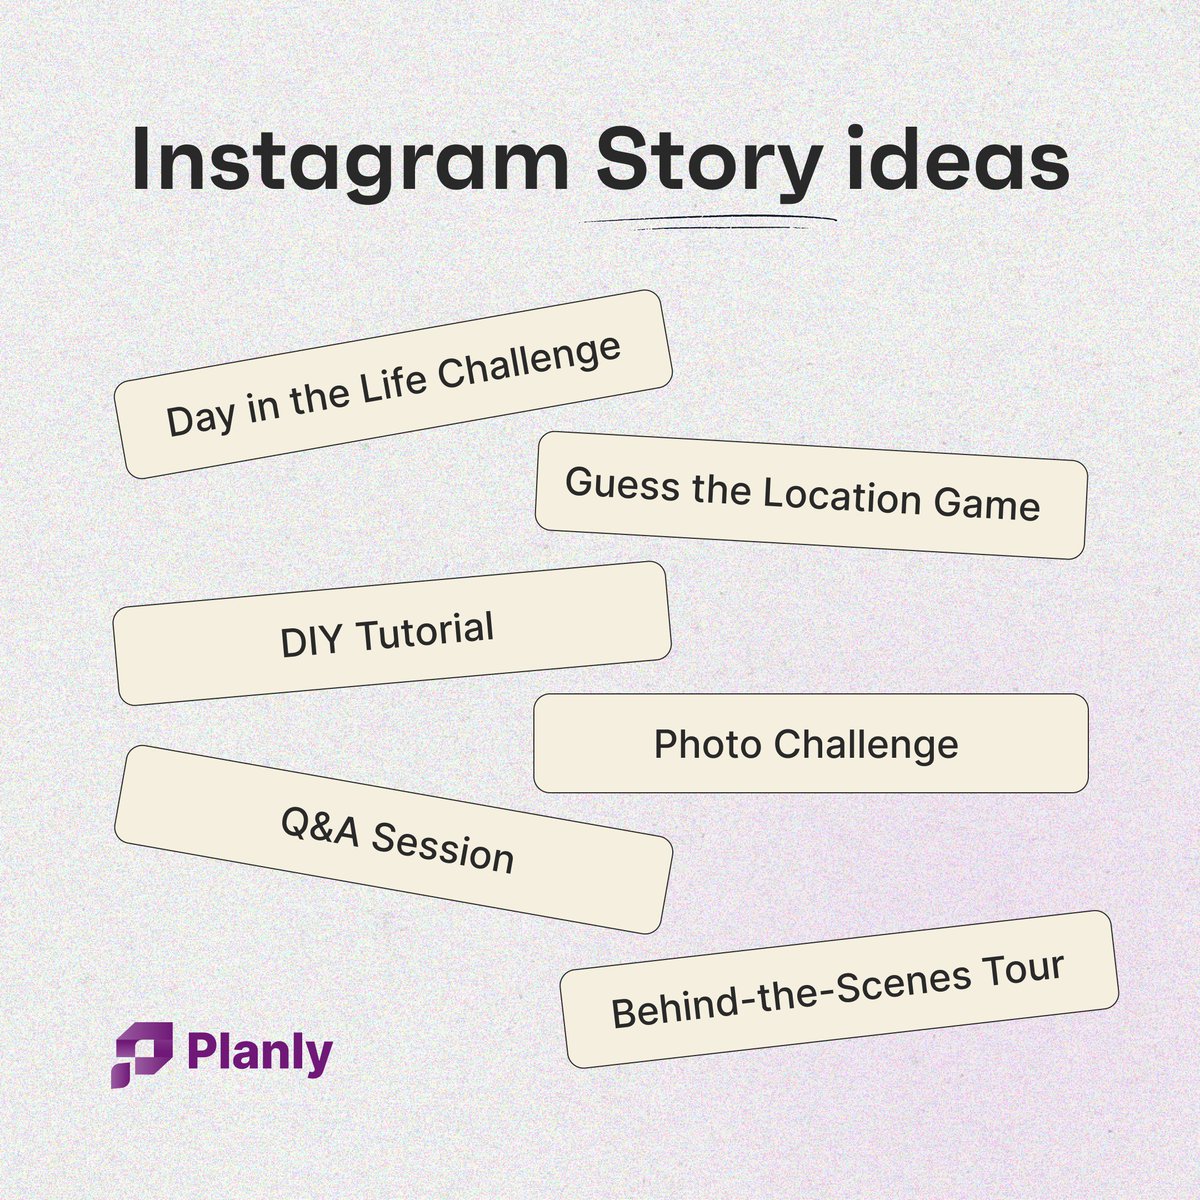 Let's all start planning Instagram stories!! 

Bonus* You can share new features about iOS 17 with your followers📱

#ios17 #update #iphonetips #instagramstoriestips #planly